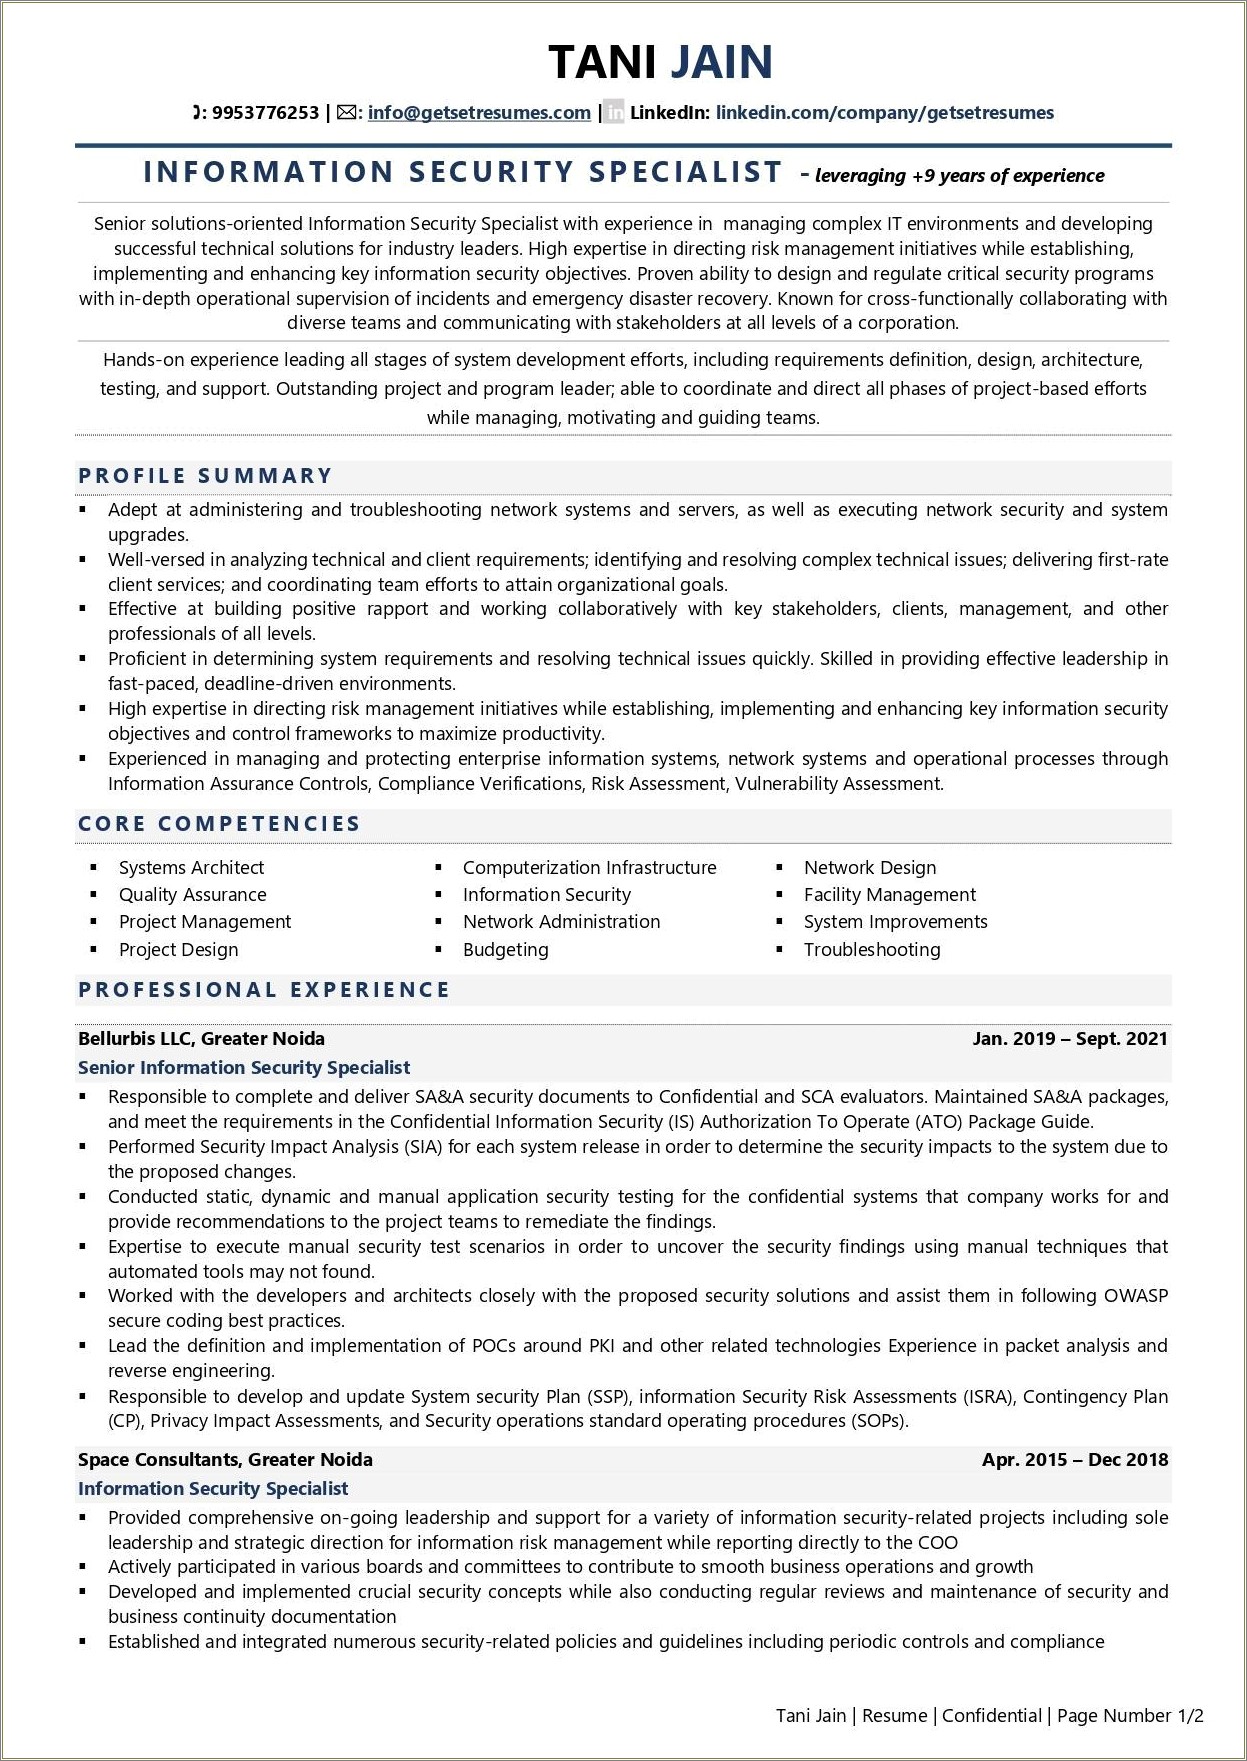 Information Security Risk Manager Resume Templates